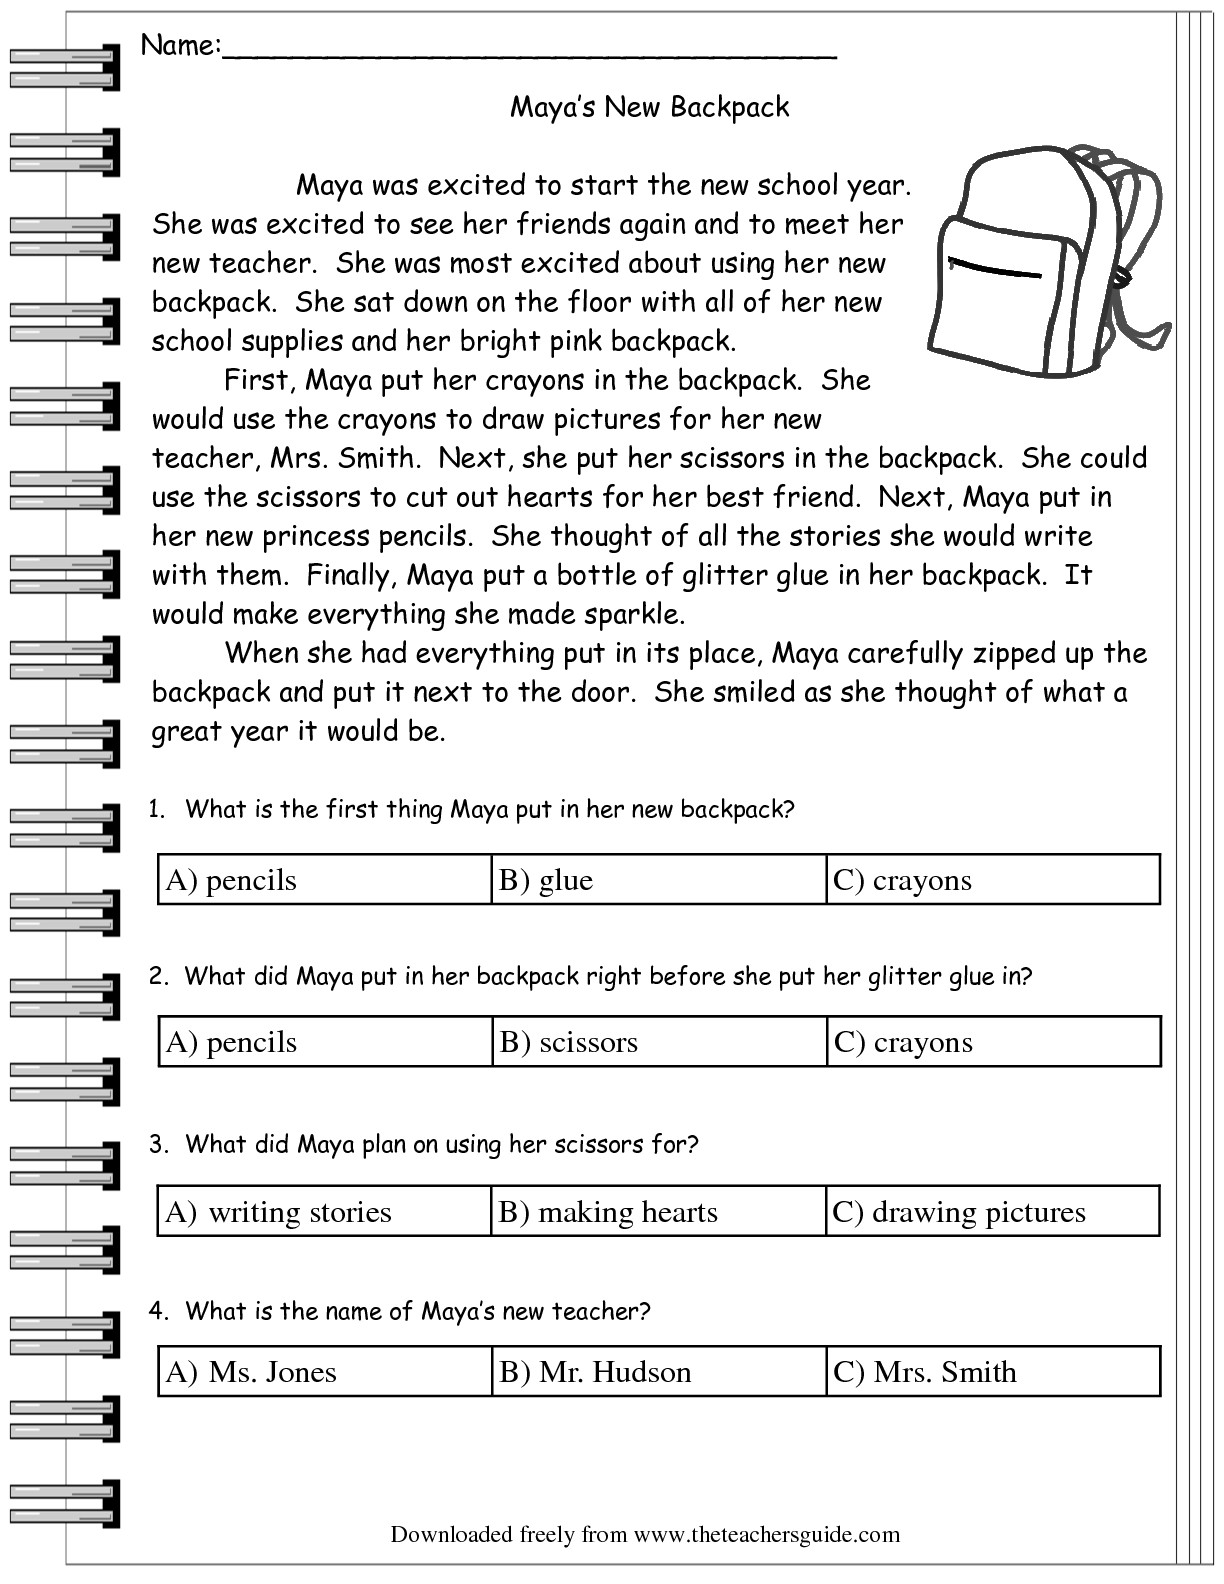 15 Images of Reading Comprehension Worksheets Questions